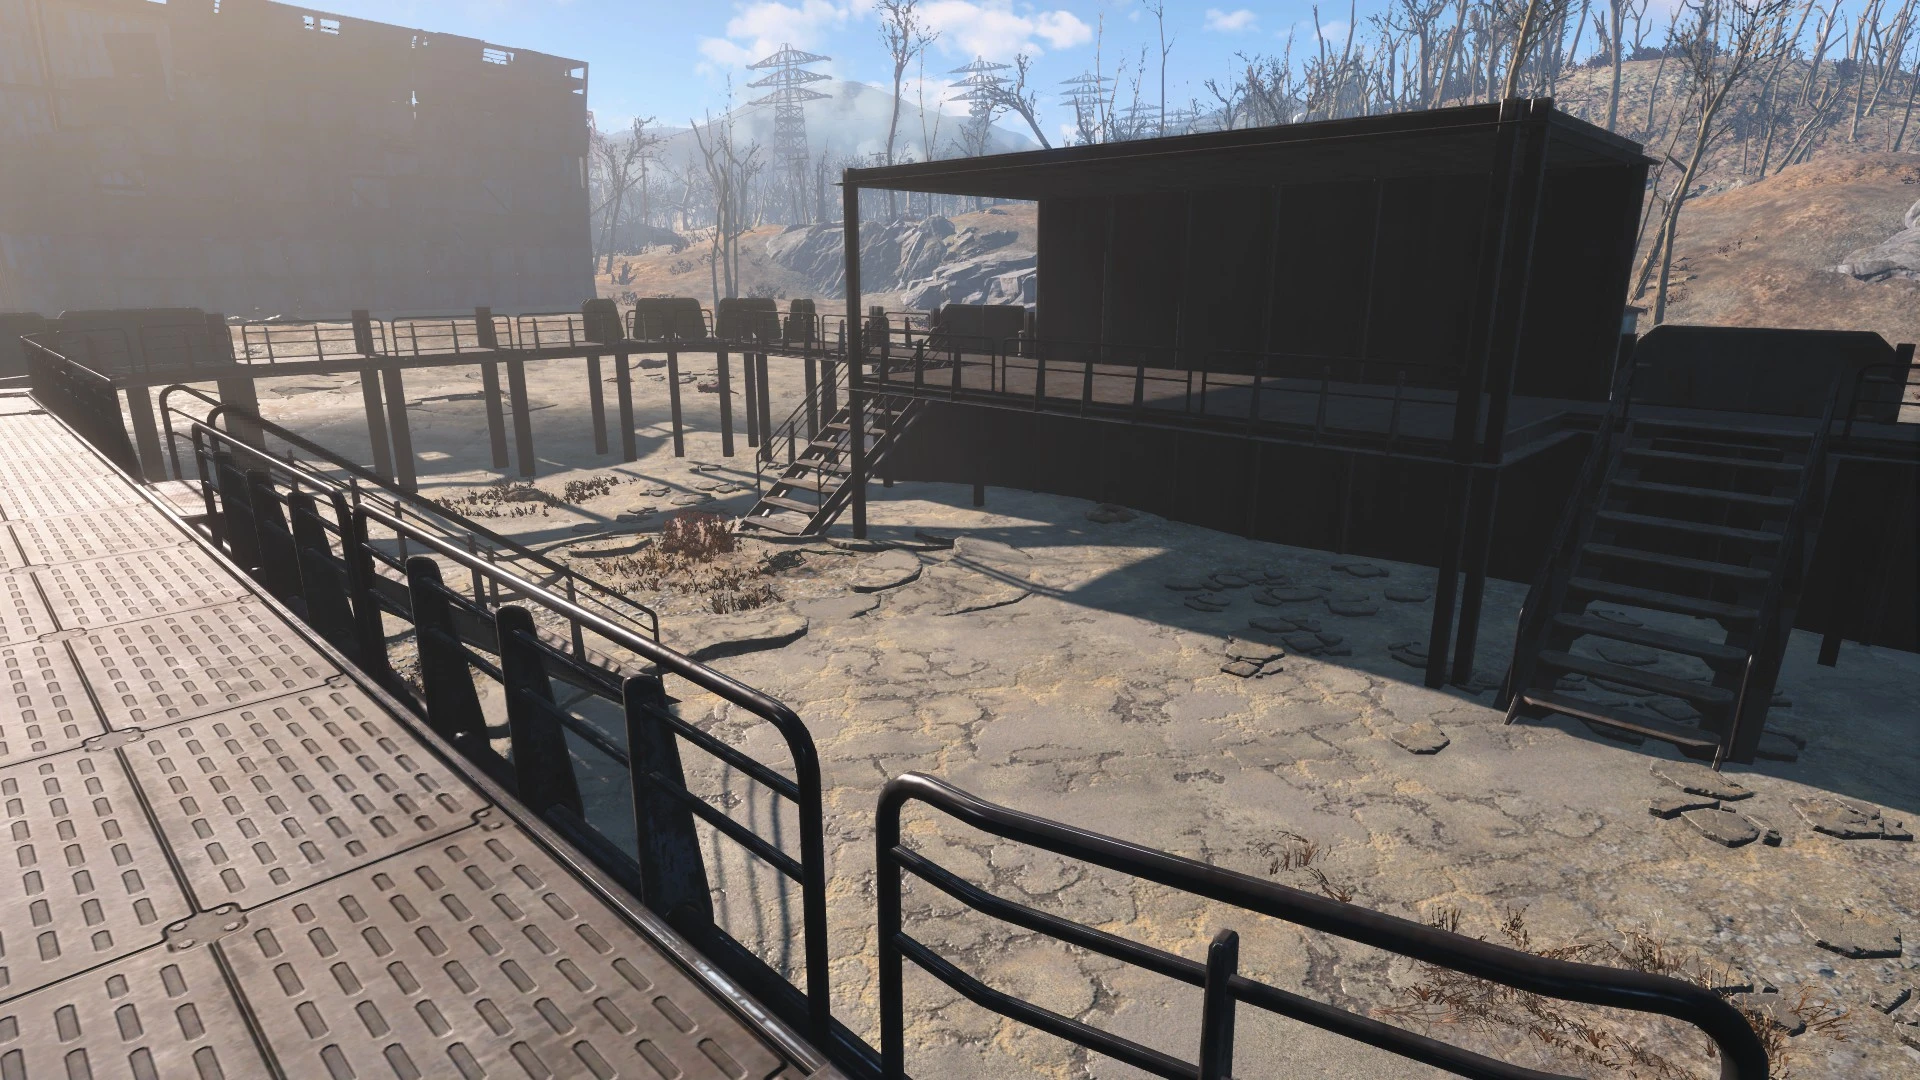 Settlement expansion all in one fallout 4 фото 102